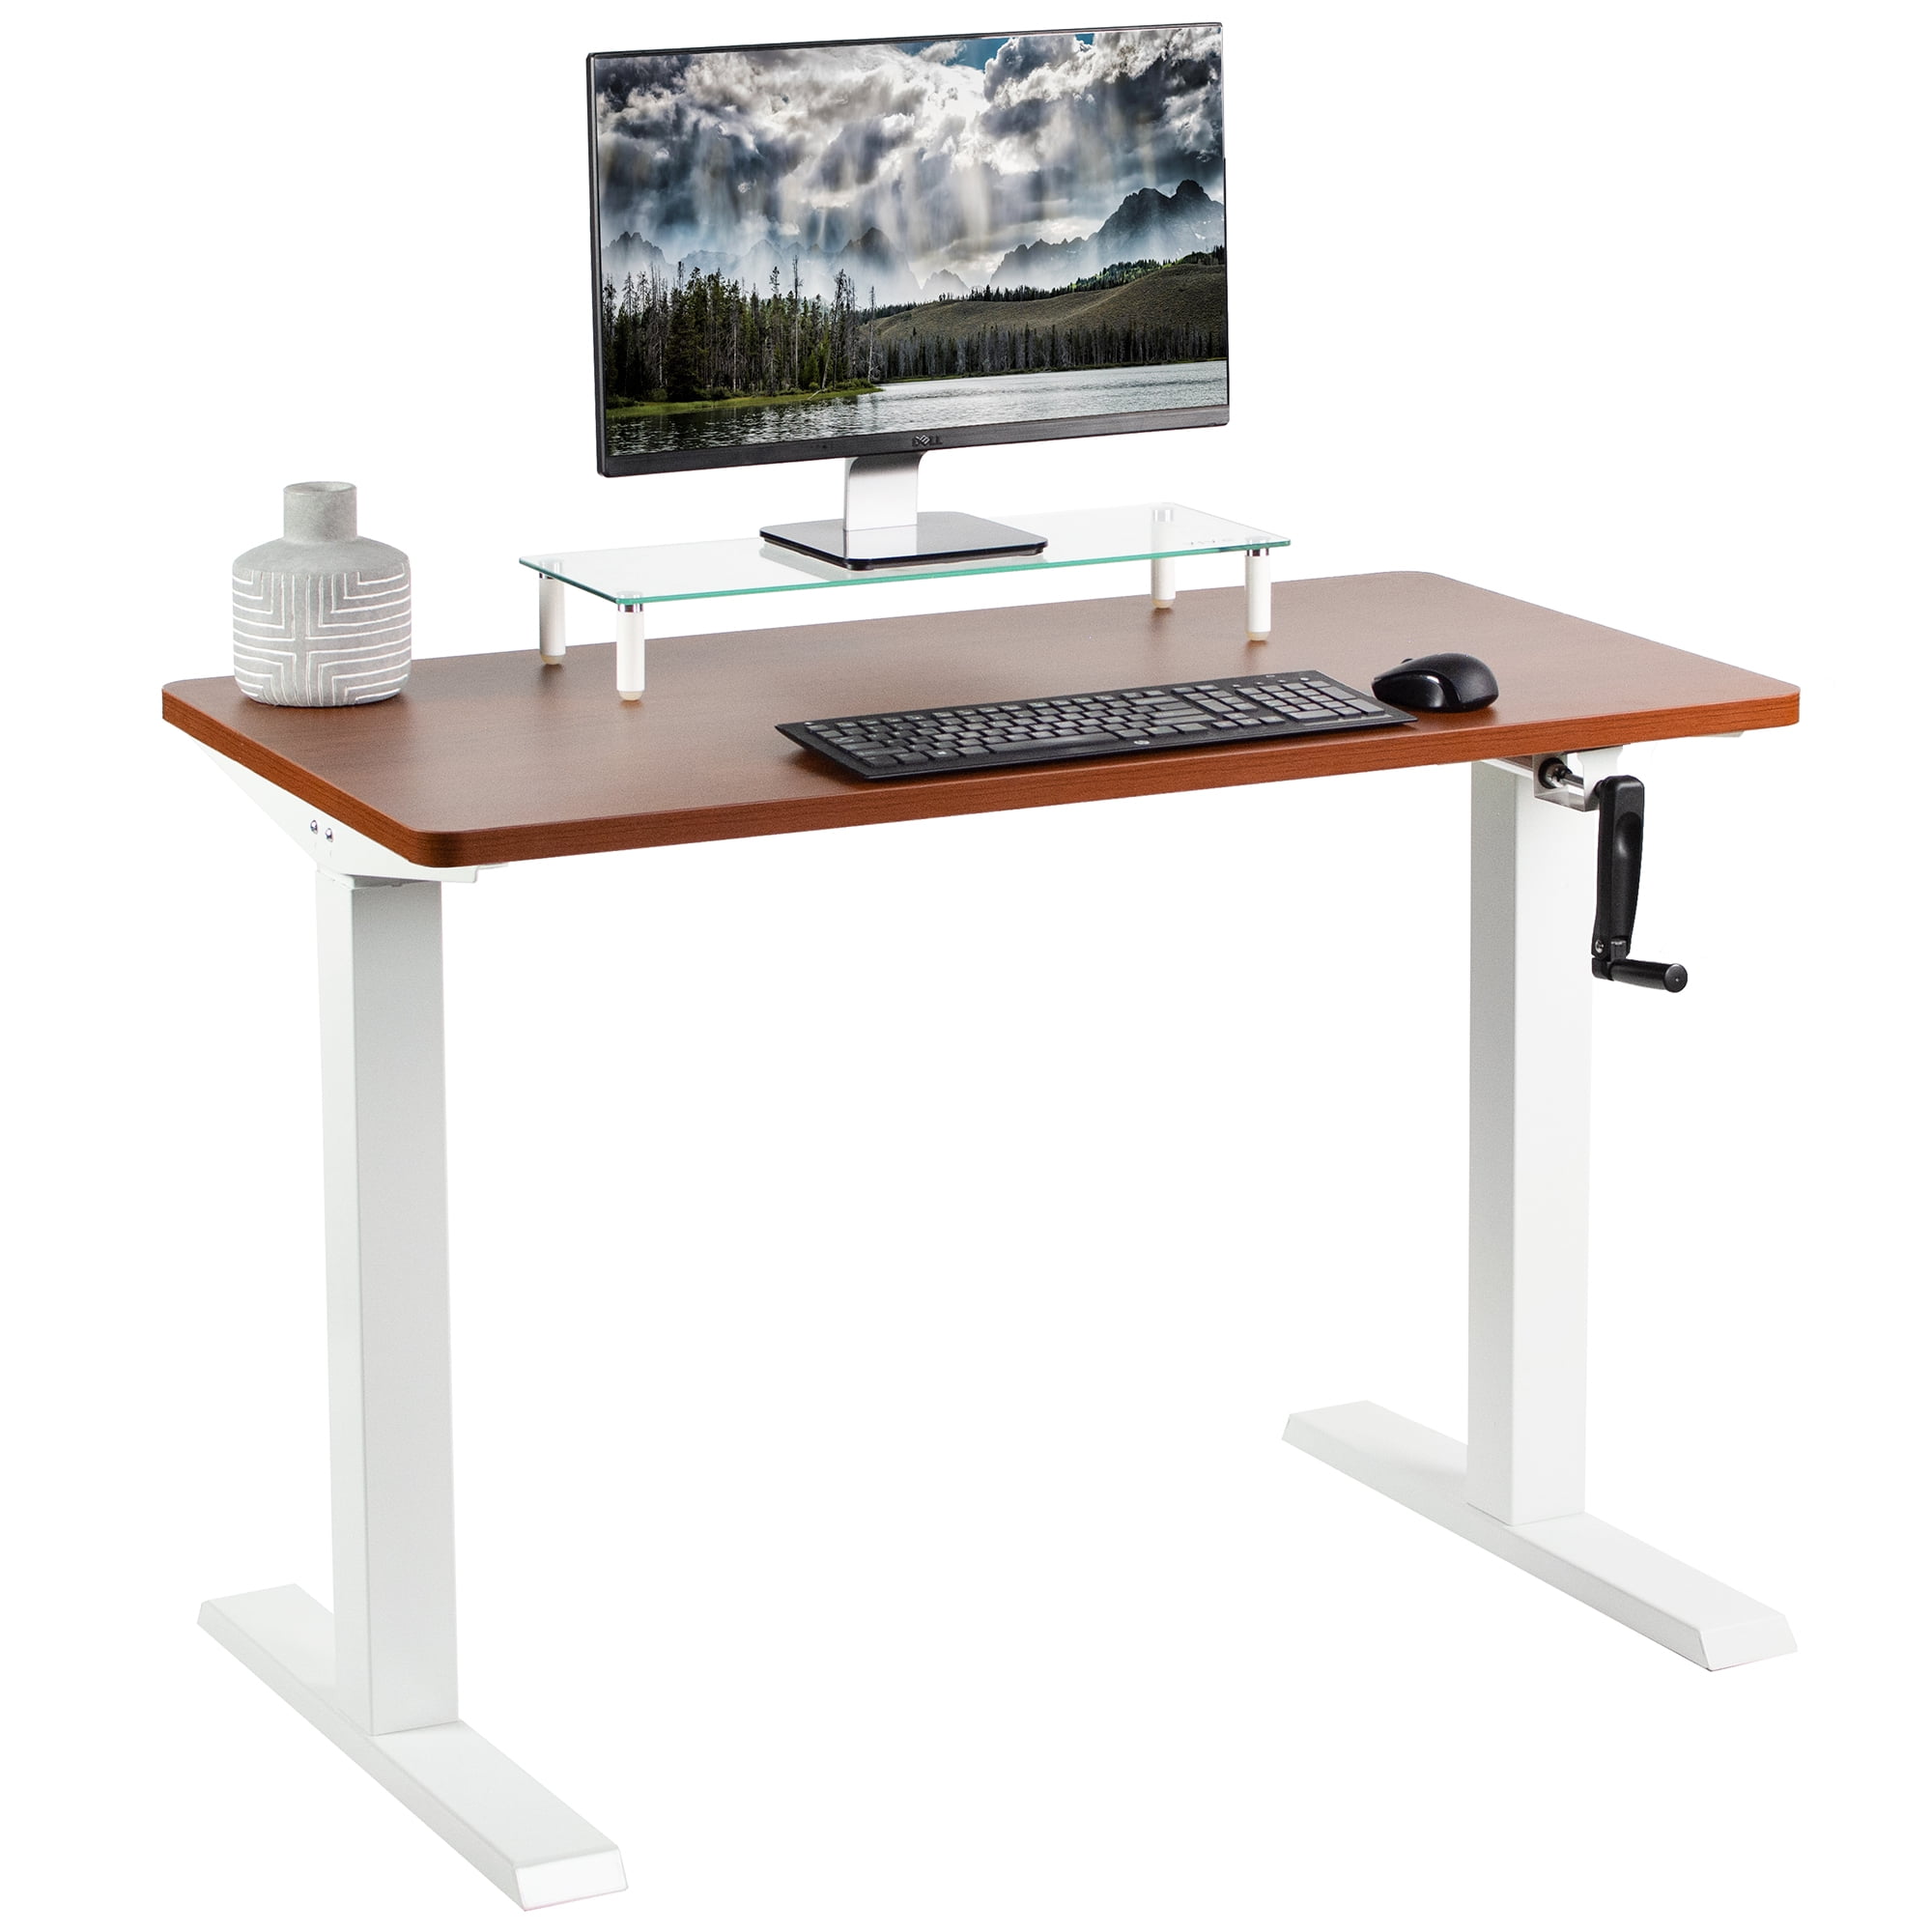 White Table Top Height Adjustable Standing Workstation with Foldable Handle VIVO Manual 43” x 24” Stand Up Desk Black Frame DESK-KIT-MB4W 